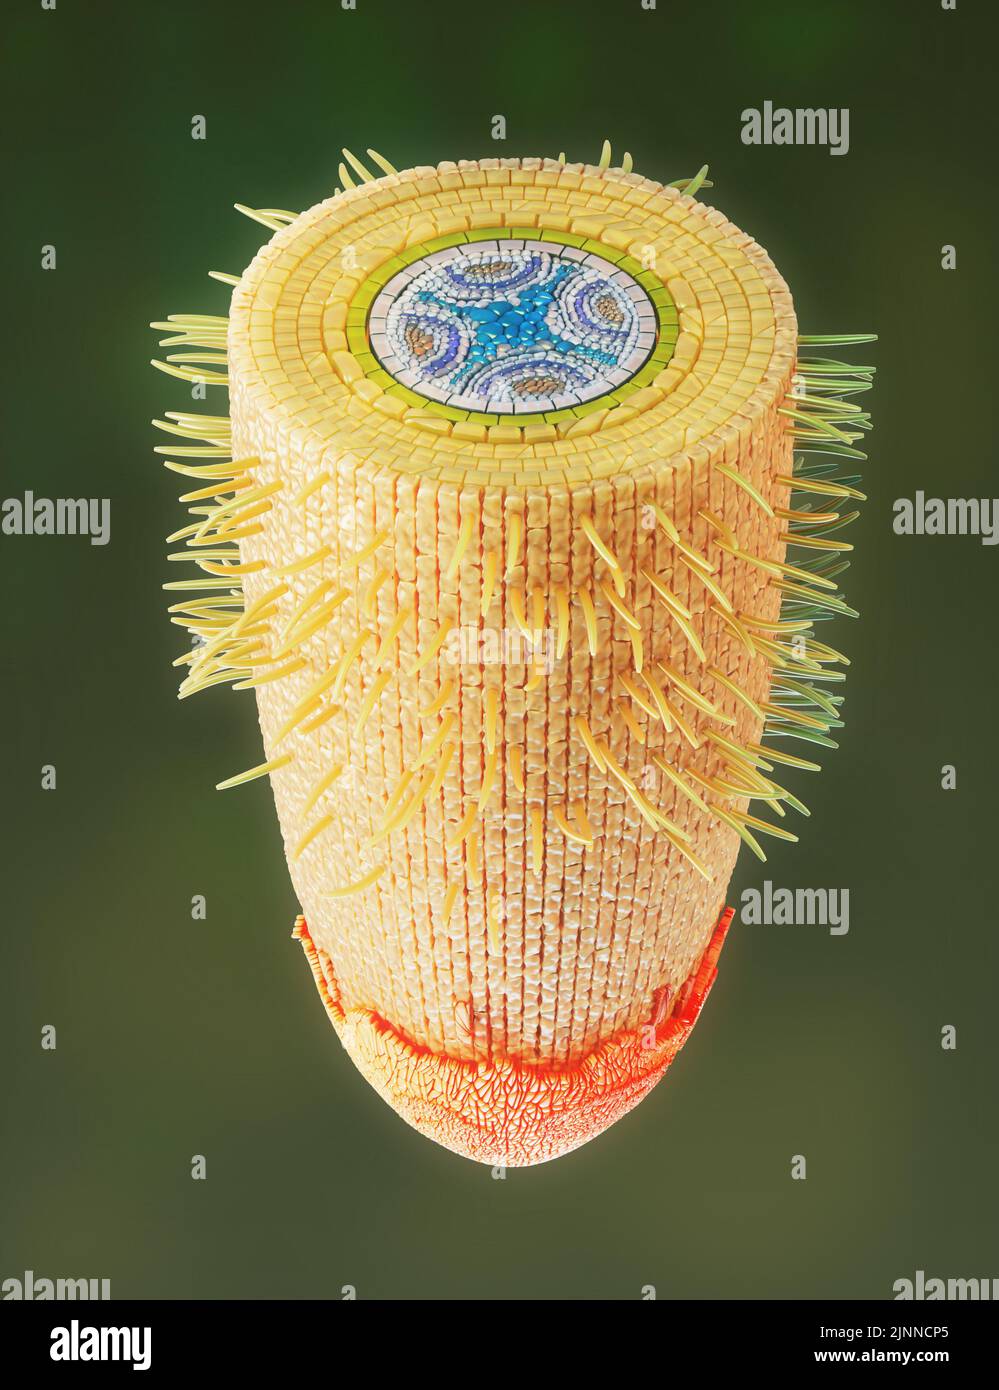 Plant root structure, illustration Stock Photo